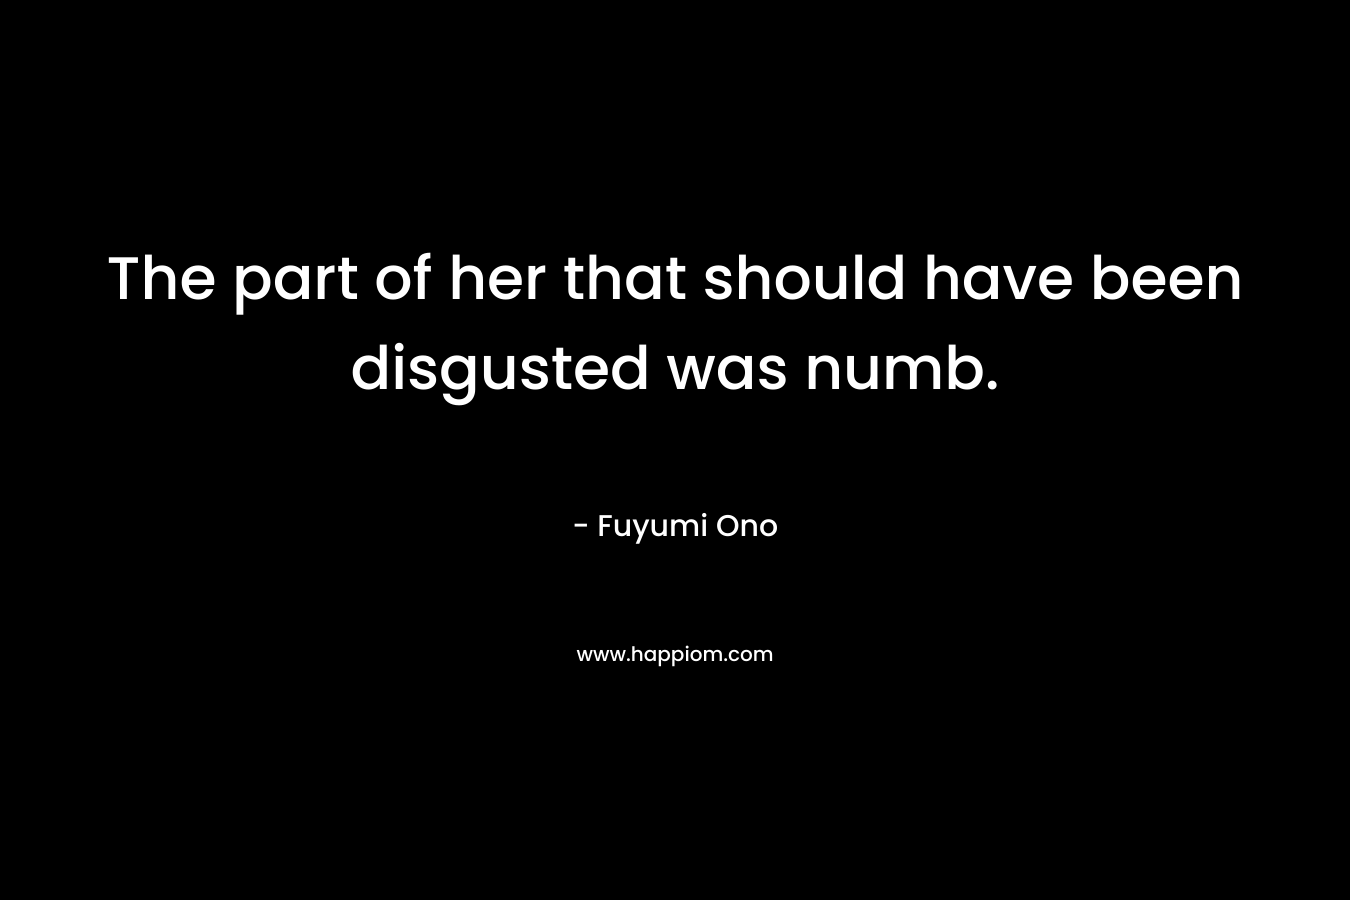 The part of her that should have been disgusted was numb. – Fuyumi Ono